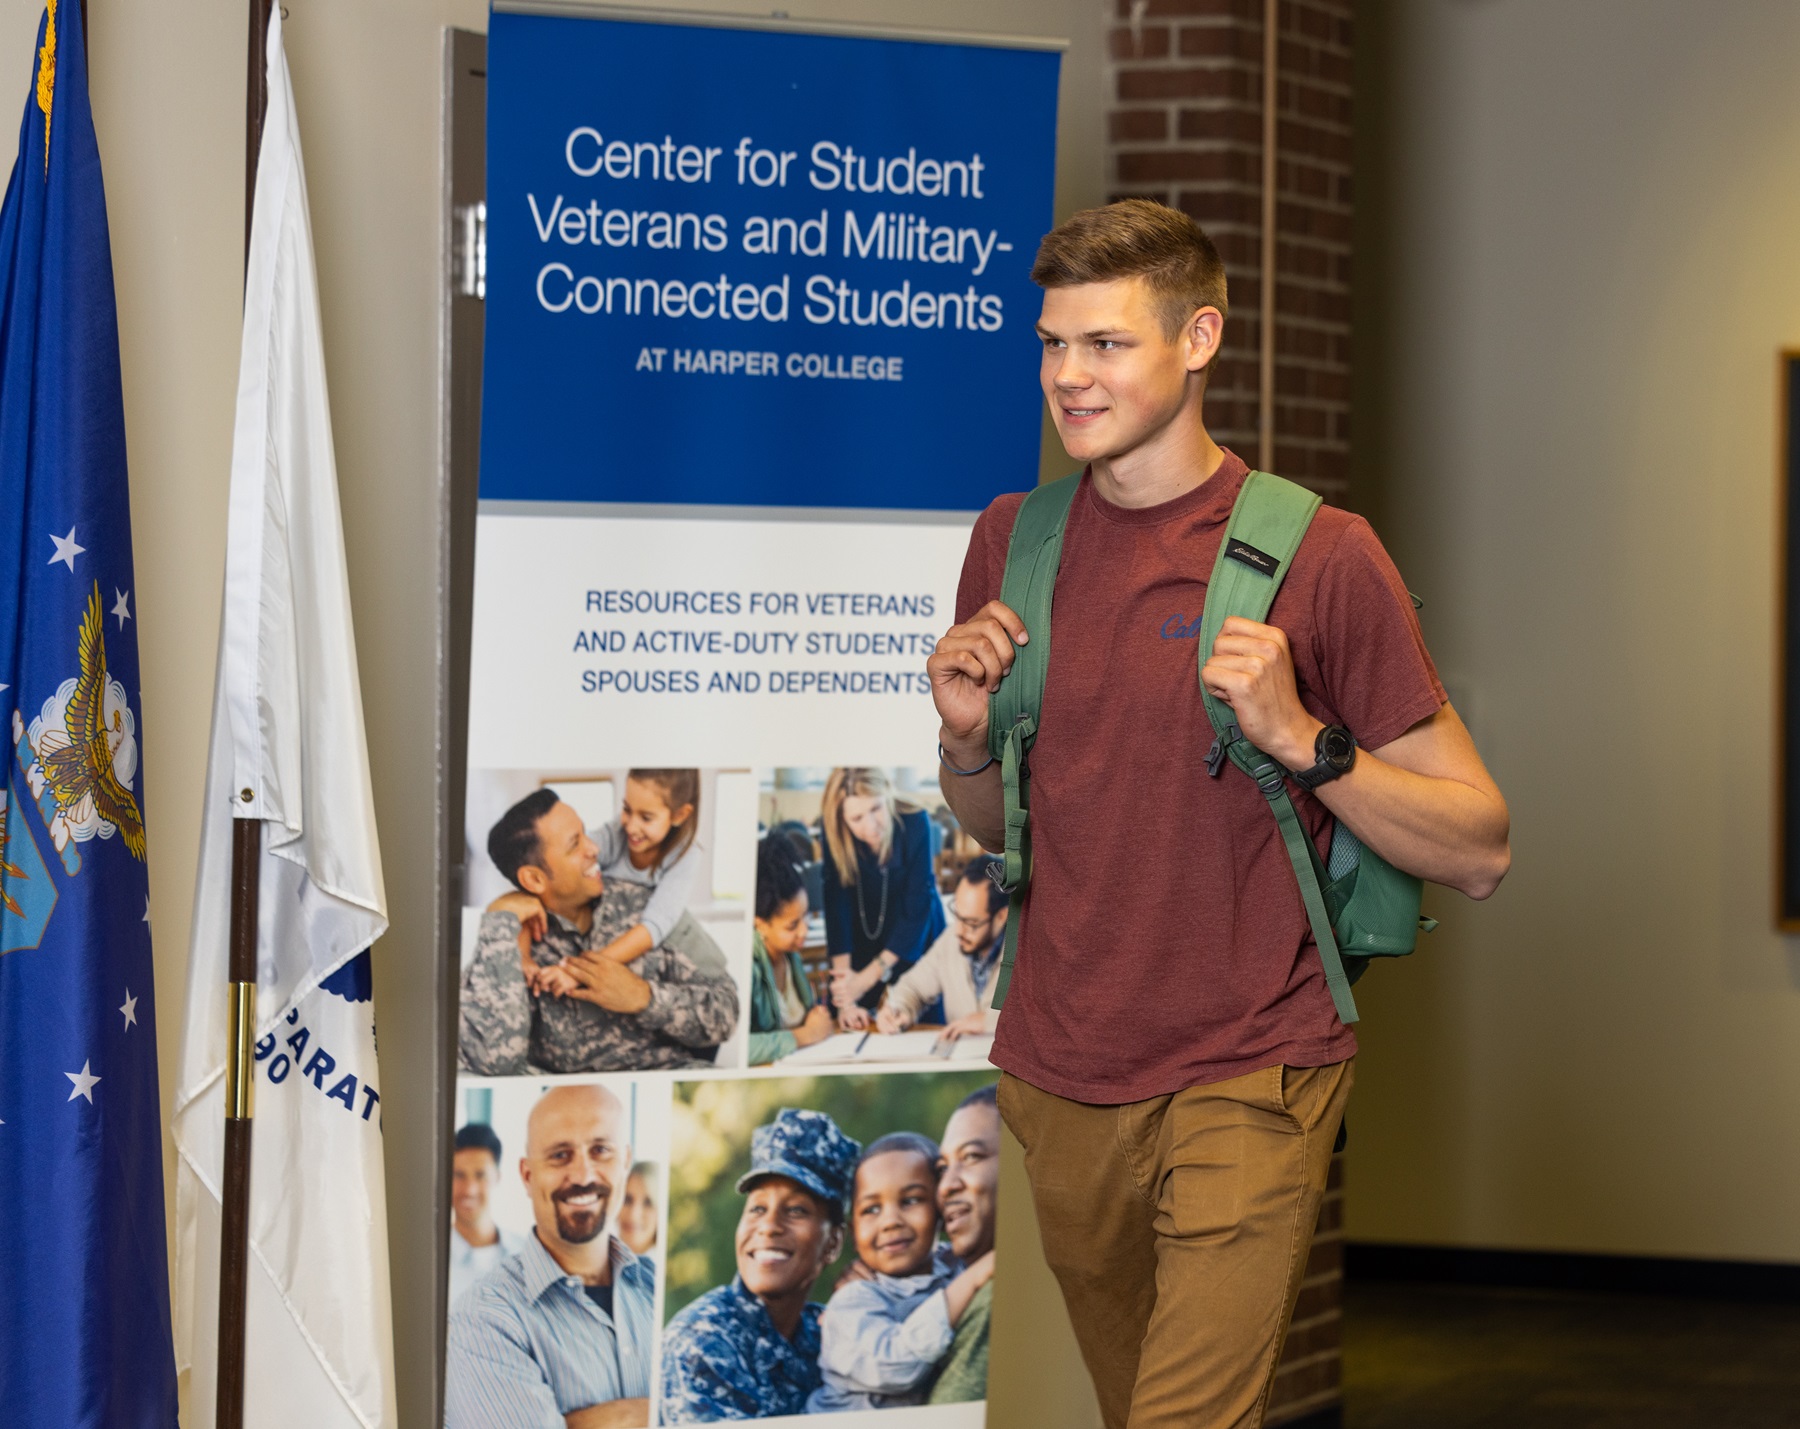 Nathan Johnson walks by the Center for Student Veterans and Military-Connected Students